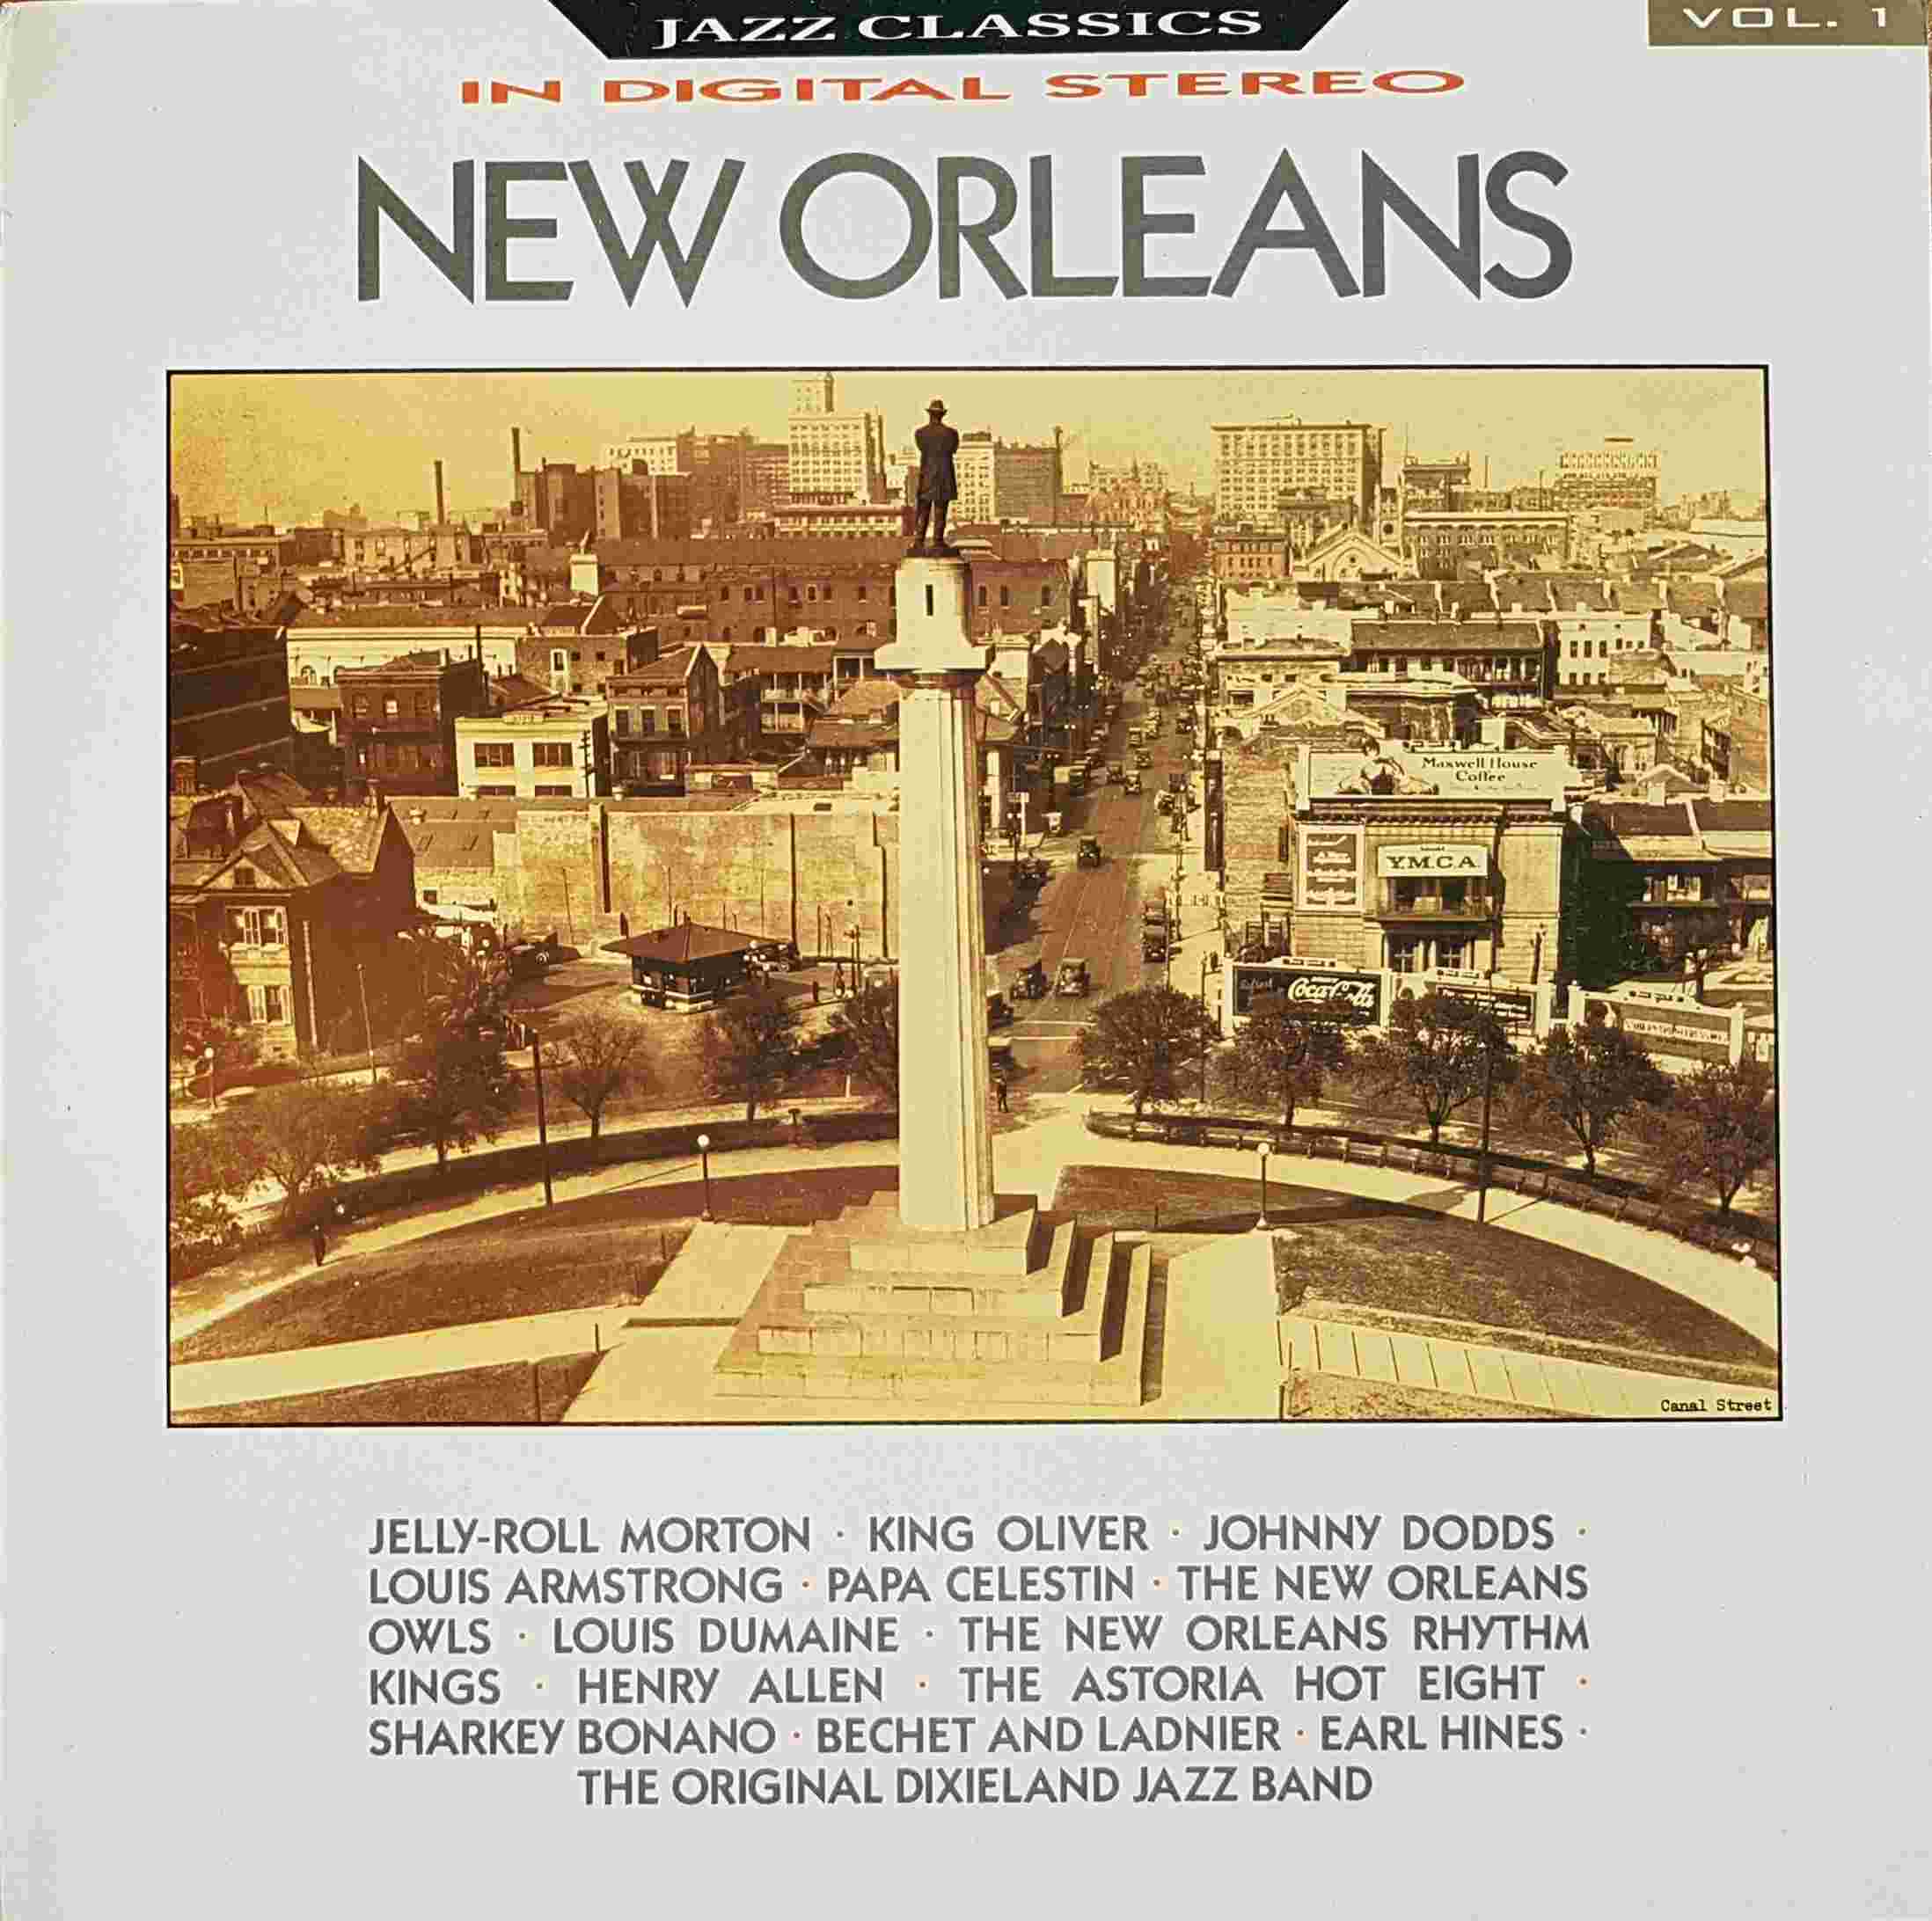 Picture of REB 588 Jazz Classics - Volume 1, New Orleans by artist Various from the BBC albums - Records and Tapes library